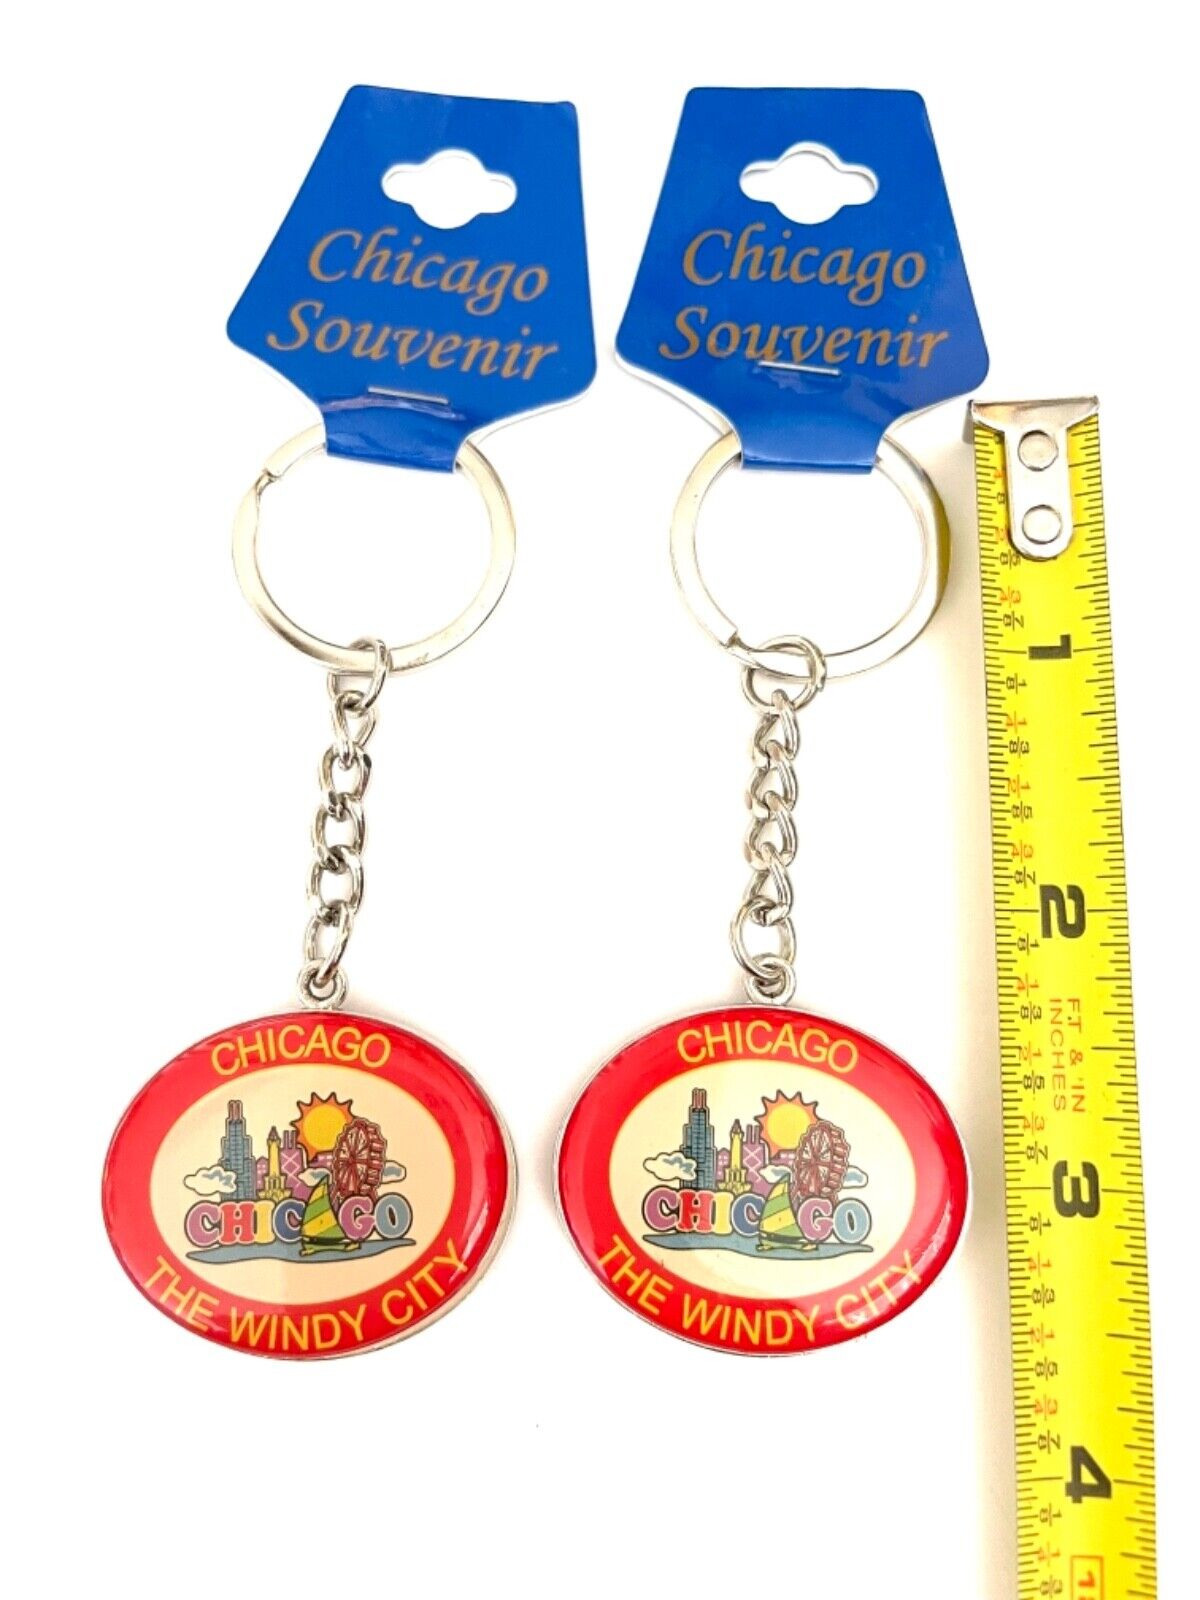 Chicago \'The Windy City\' Souvenir Keychain Set of 2 - Oval Shape Double Sided 